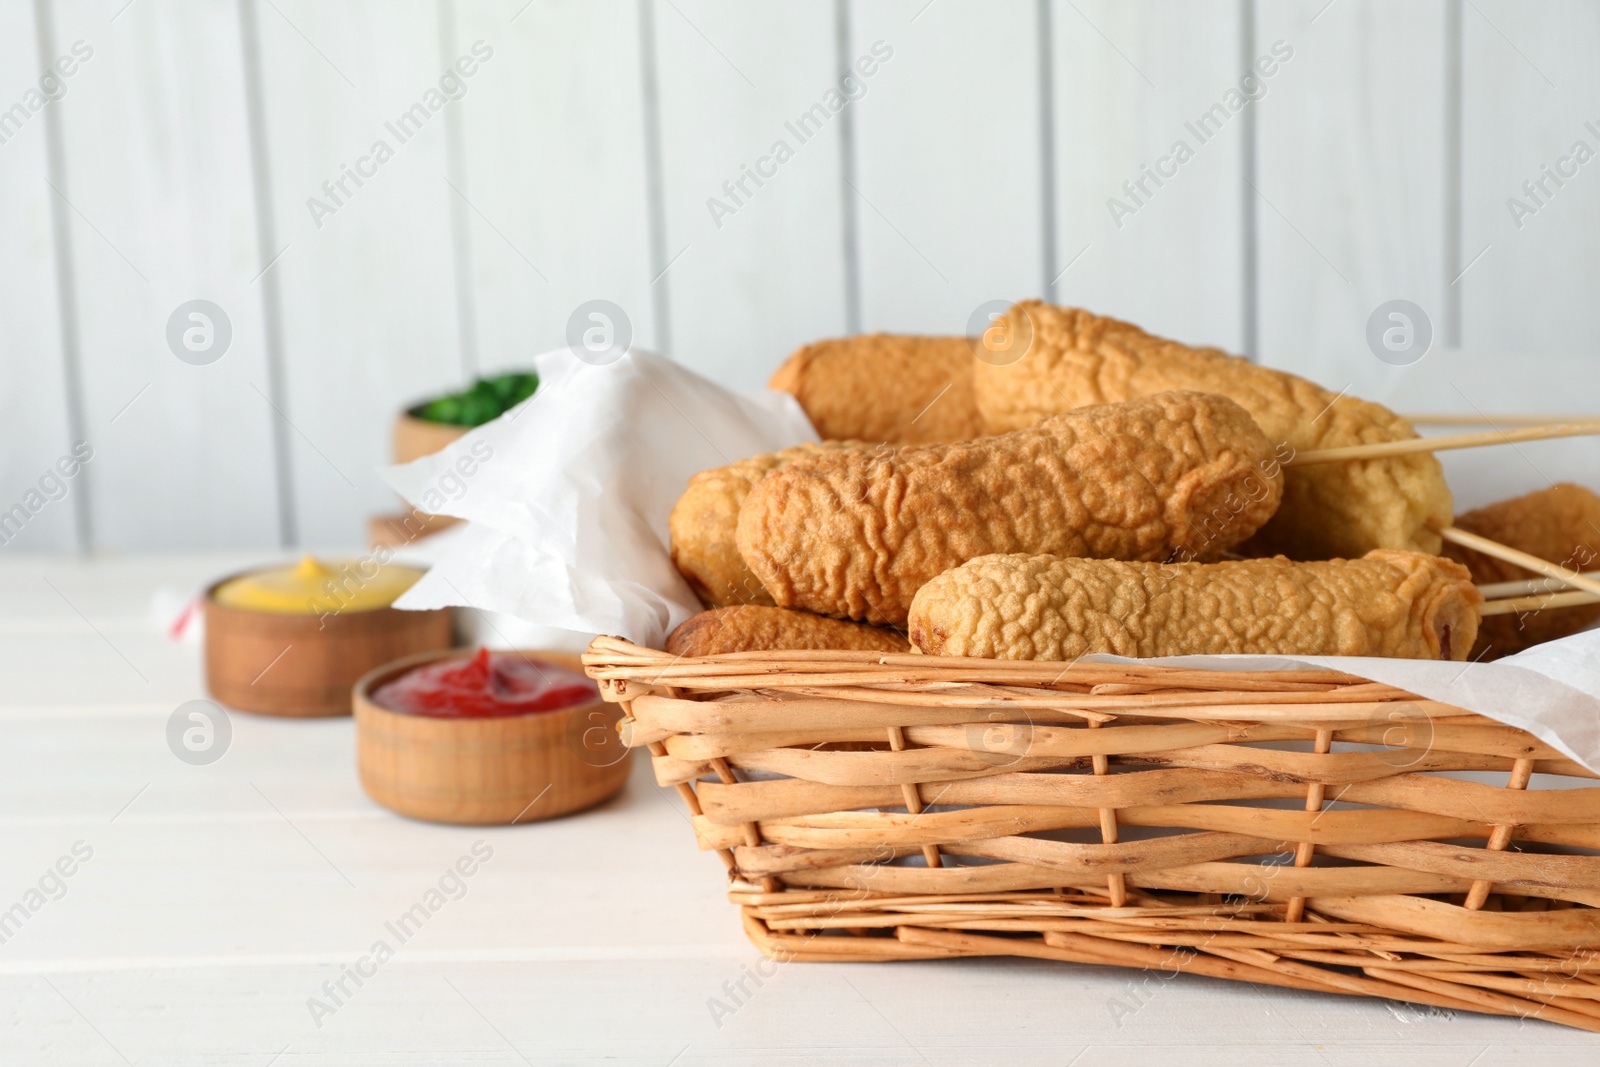 Photo of Delicious deep fried corn dogs in basket and sauces on white wooden table